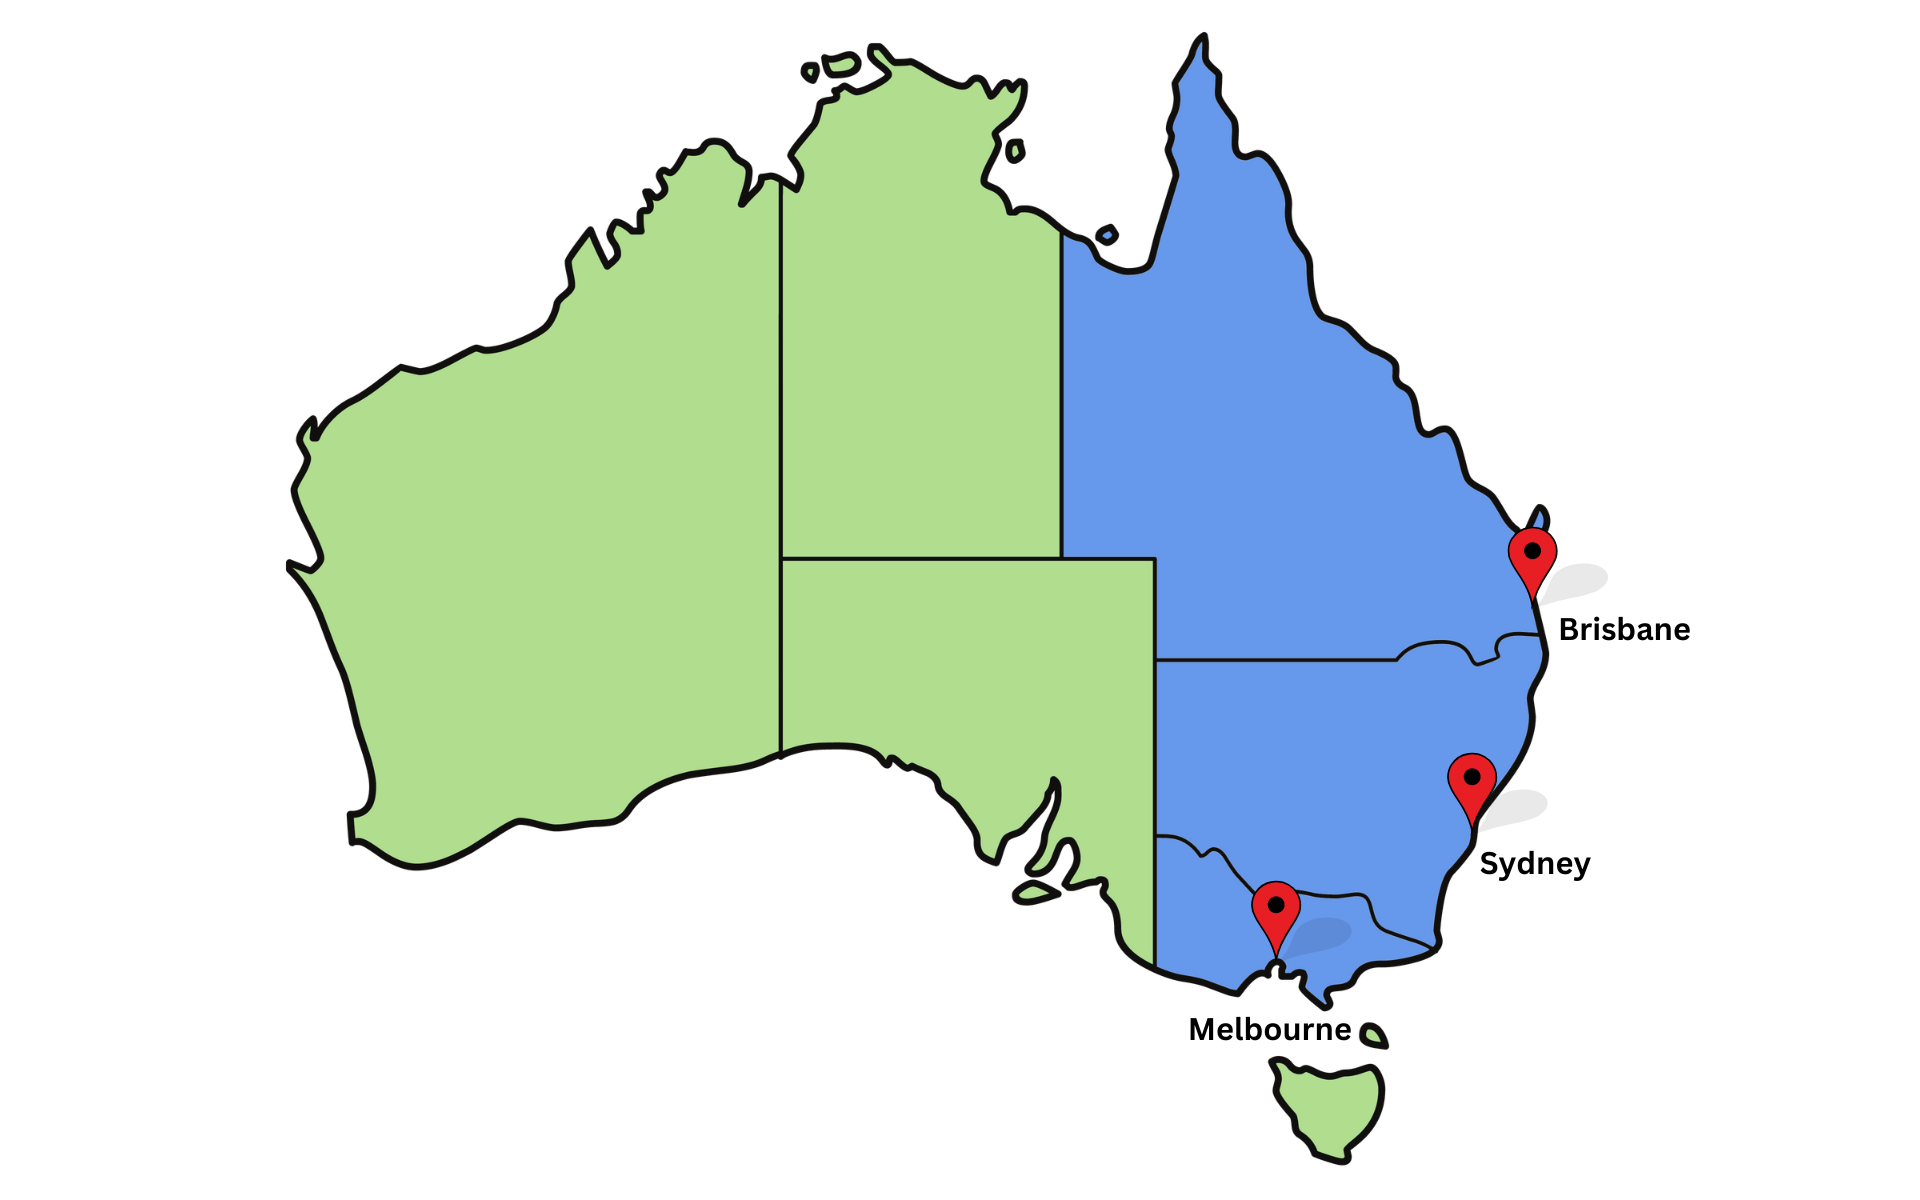 Marble Care operates in Victoria, New South Wales, and Queensland